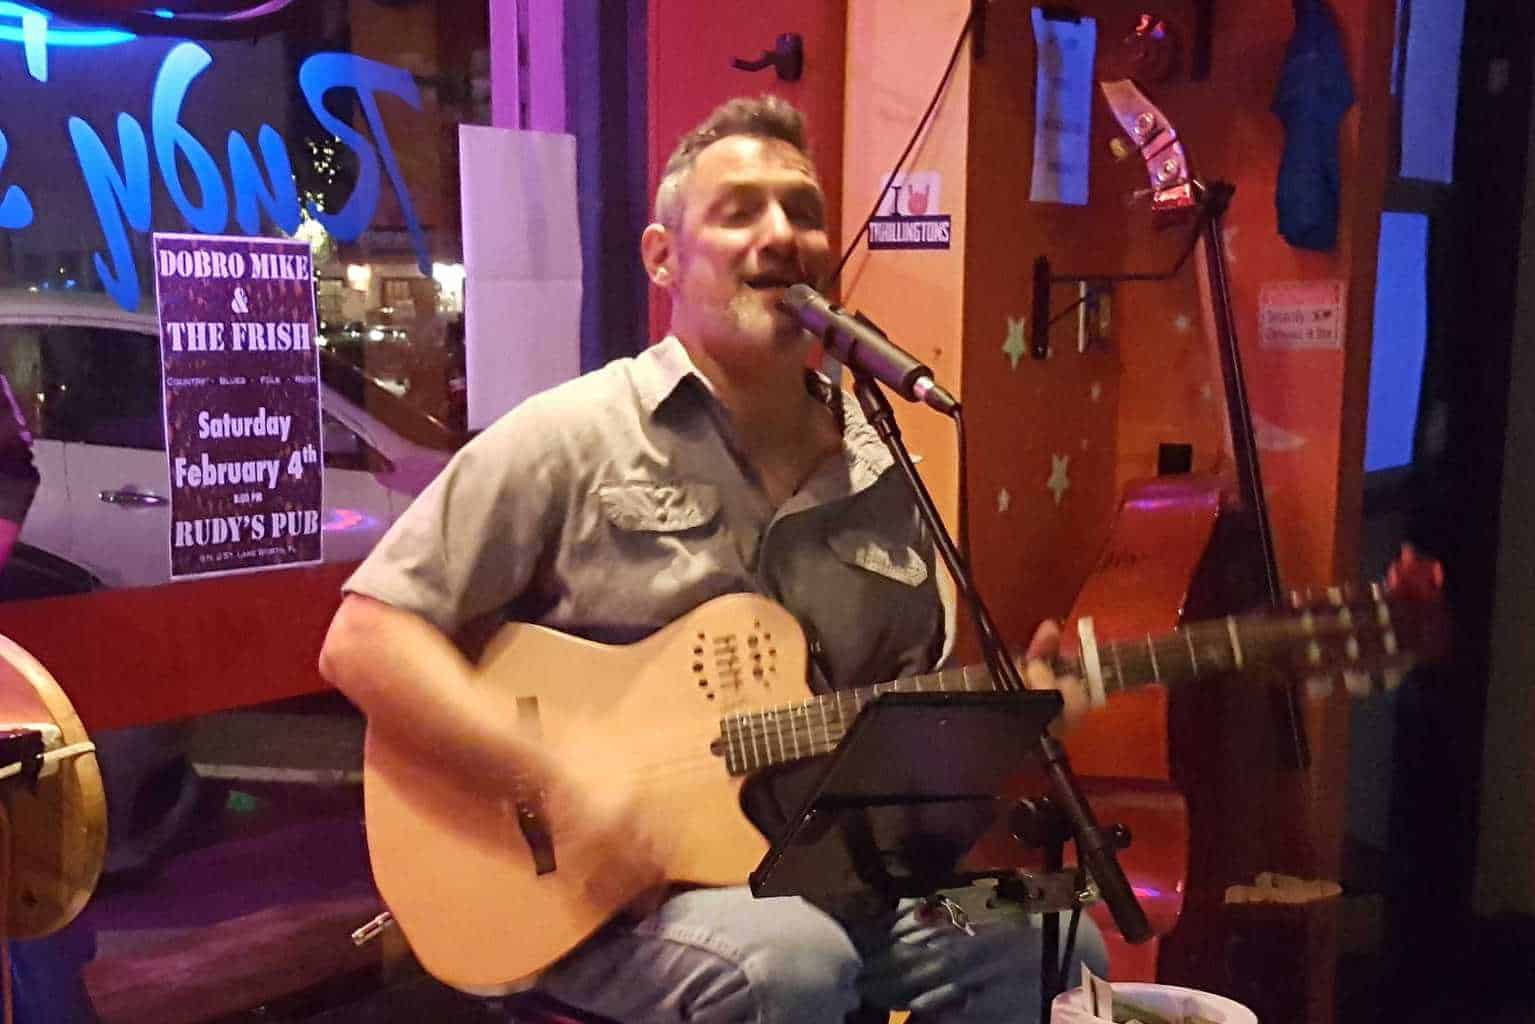 Steven Vincent at Pirate's Well